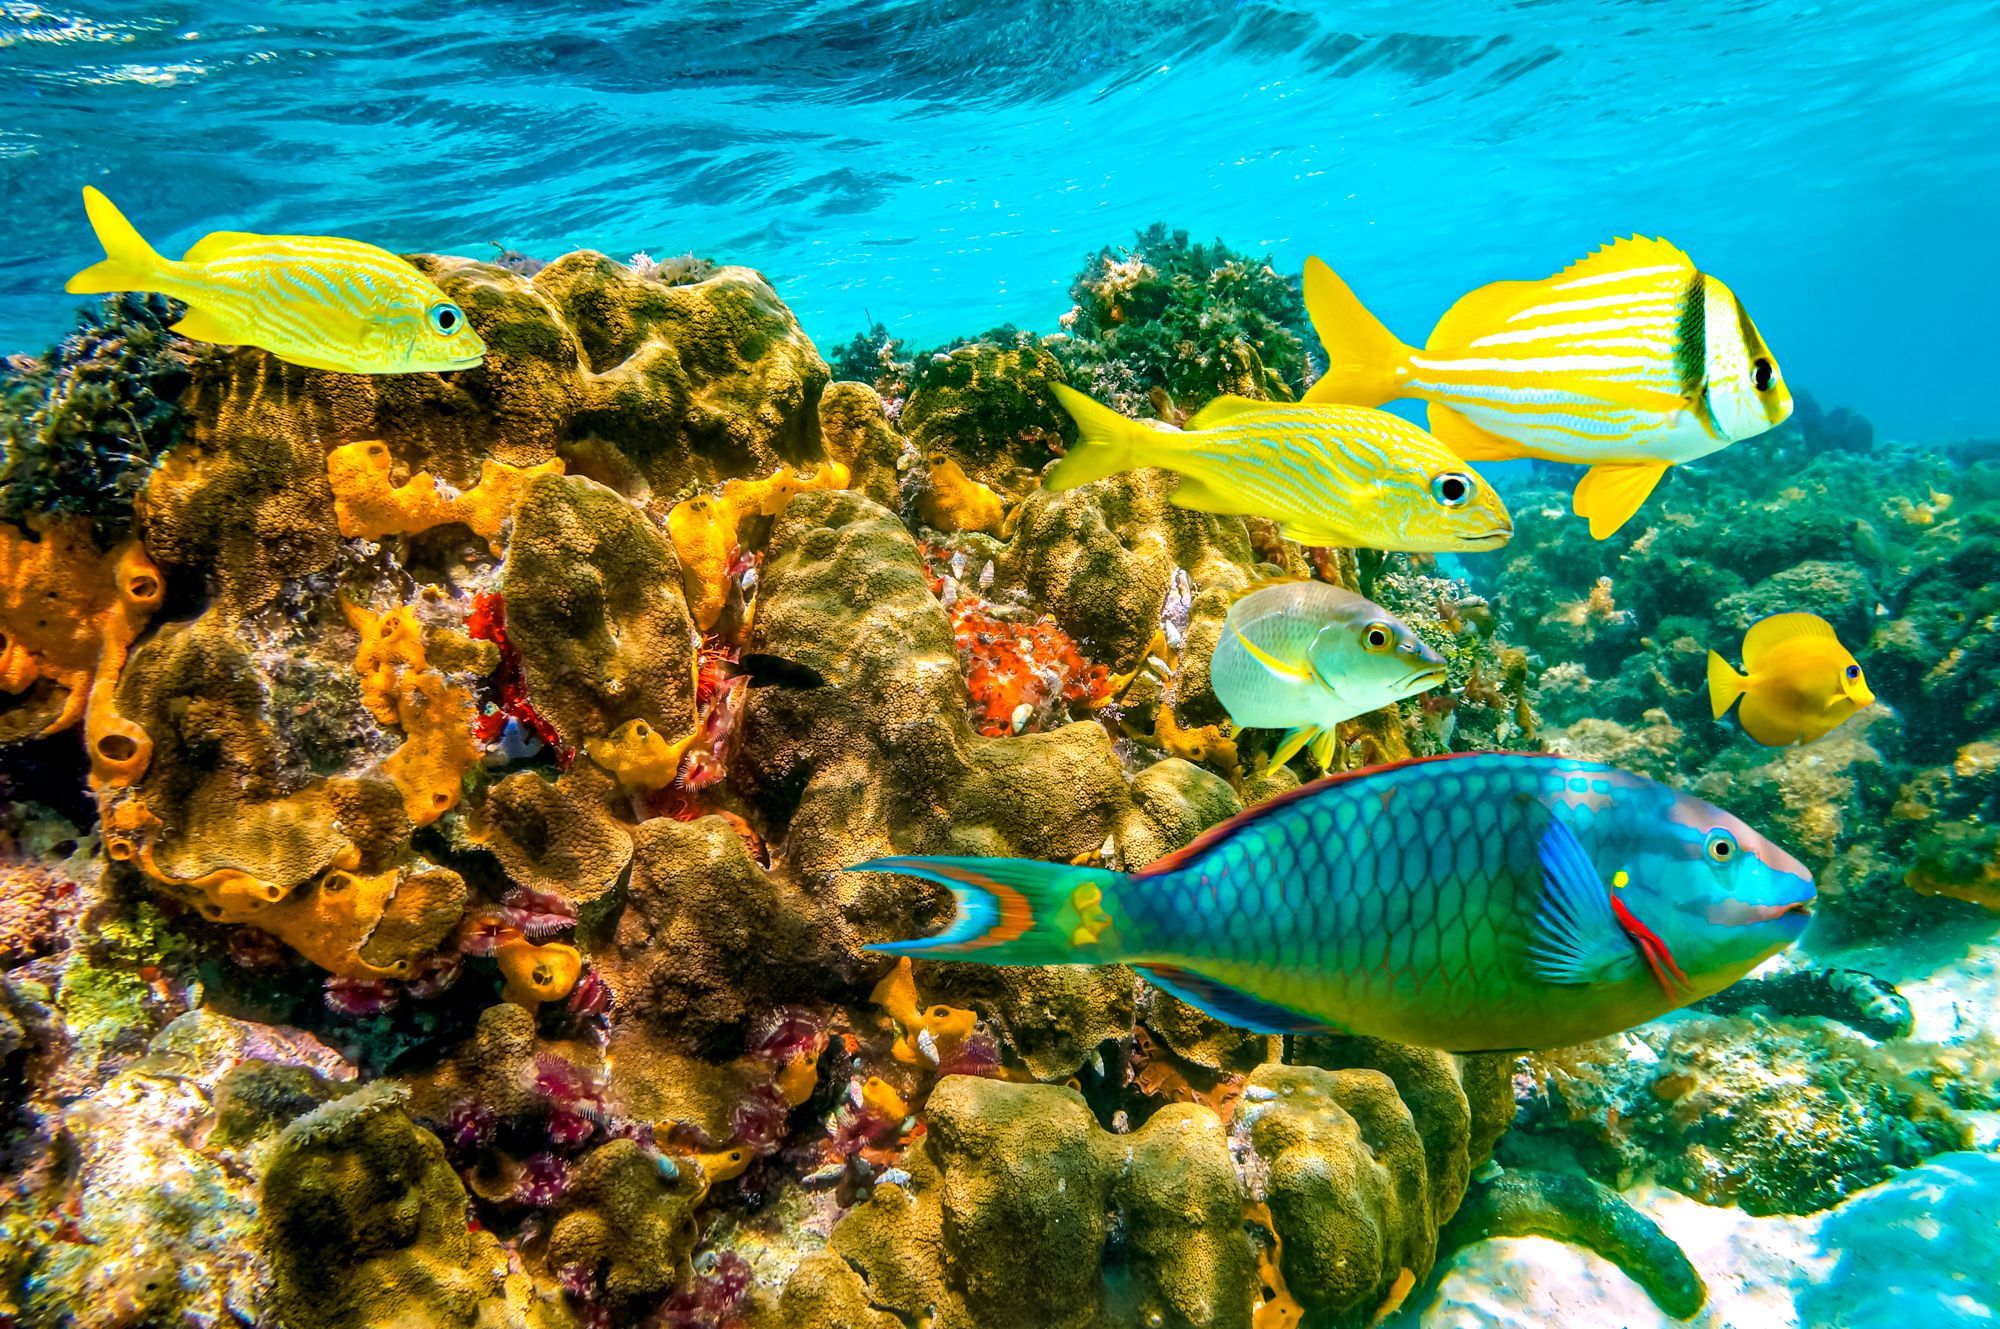 Want To Snorkel In Jamaica? Here Are The Best Snorkeling Spots To Try!